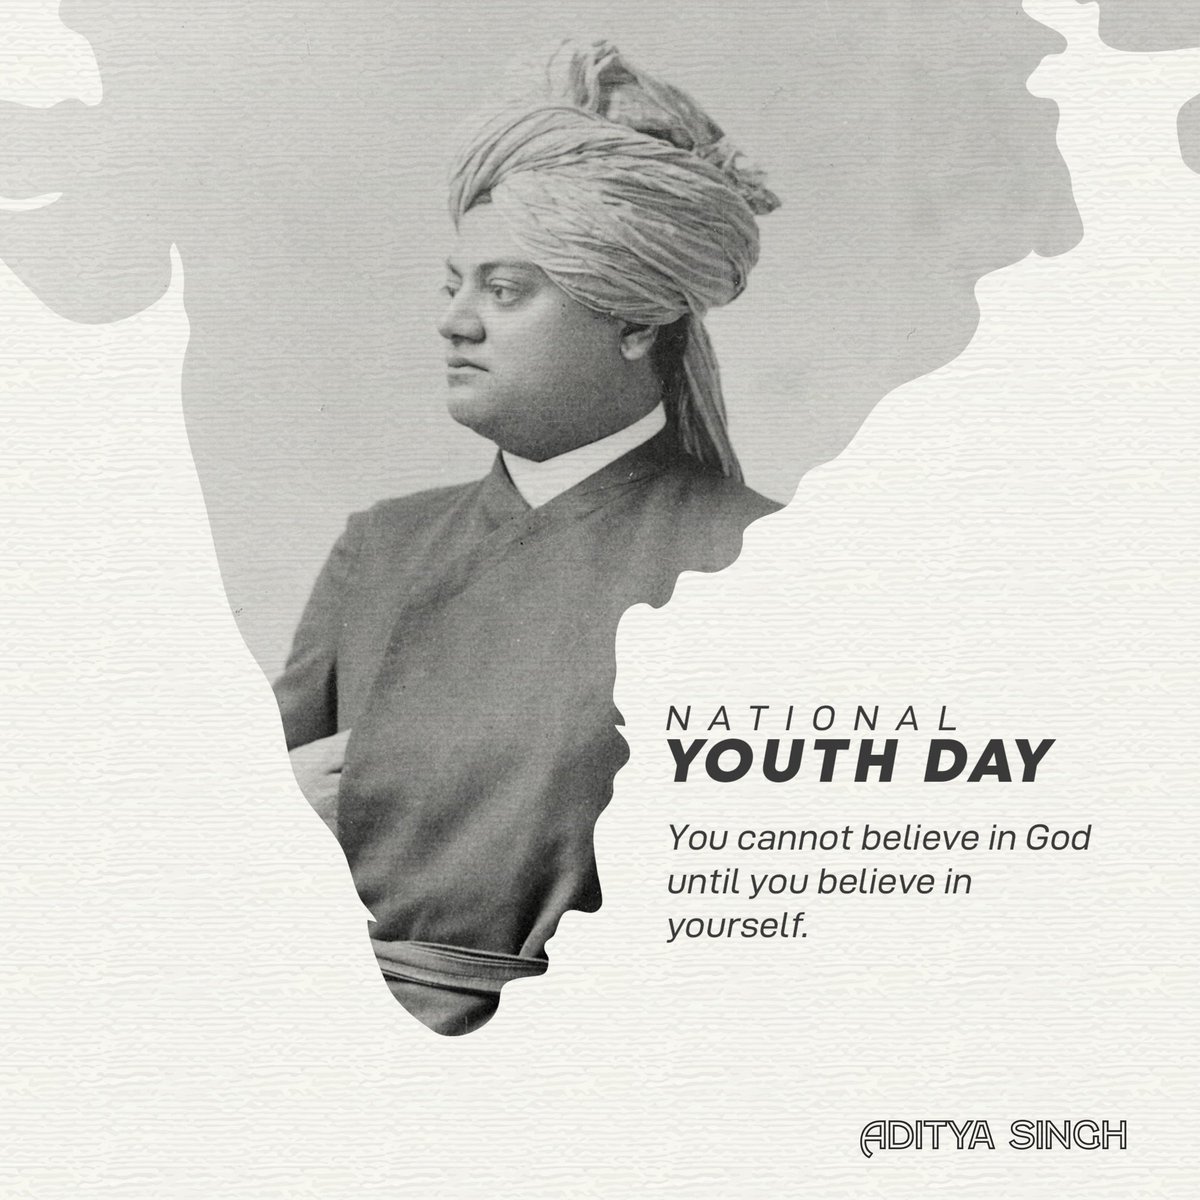 “Take Risks in your Life,
 If you Win, you can Lead!
 If you Lose, you can Guide.
Wish you all a #HappyNationalYouthDay'

#SwamiVivekananda
#Youthday #स्वामी_विवेकानंद  #Spirituality #Hinduism #SwamiVivekanandaJayanti #स्वामी_विवेकानंद_जयन्ती #युवा_दिवस